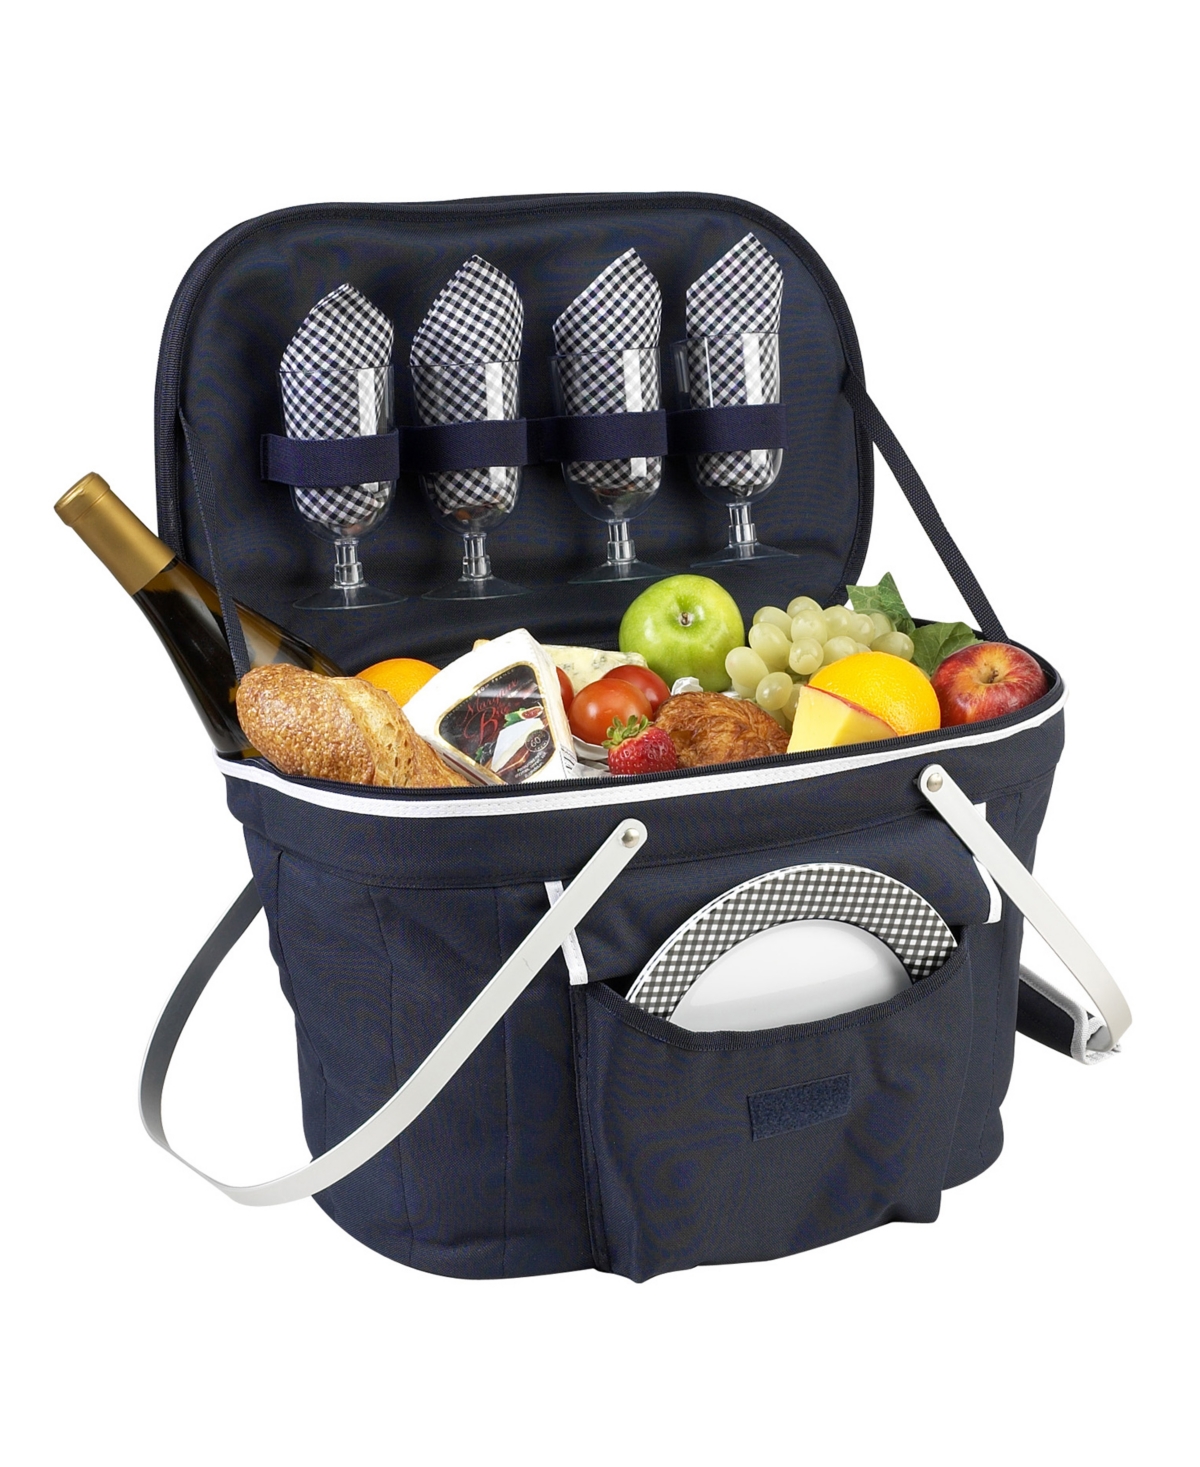 Collapsible Picnic Basket Cooler - Equipped with Service For 4 - Navy